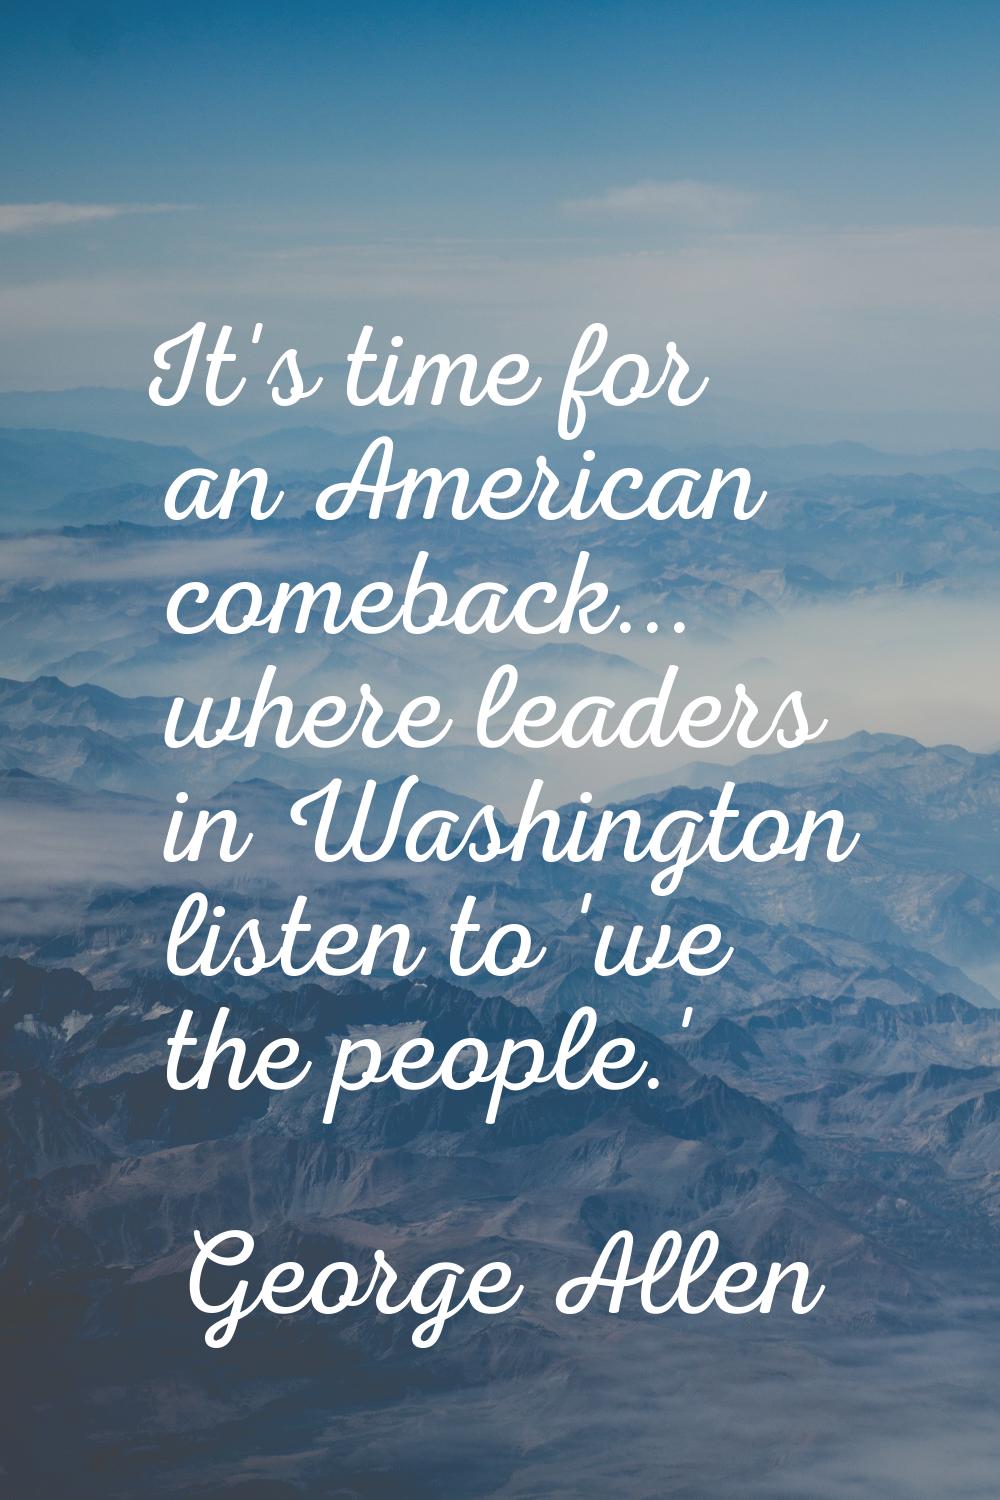 It's time for an American comeback... where leaders in Washington listen to 'we the people.'